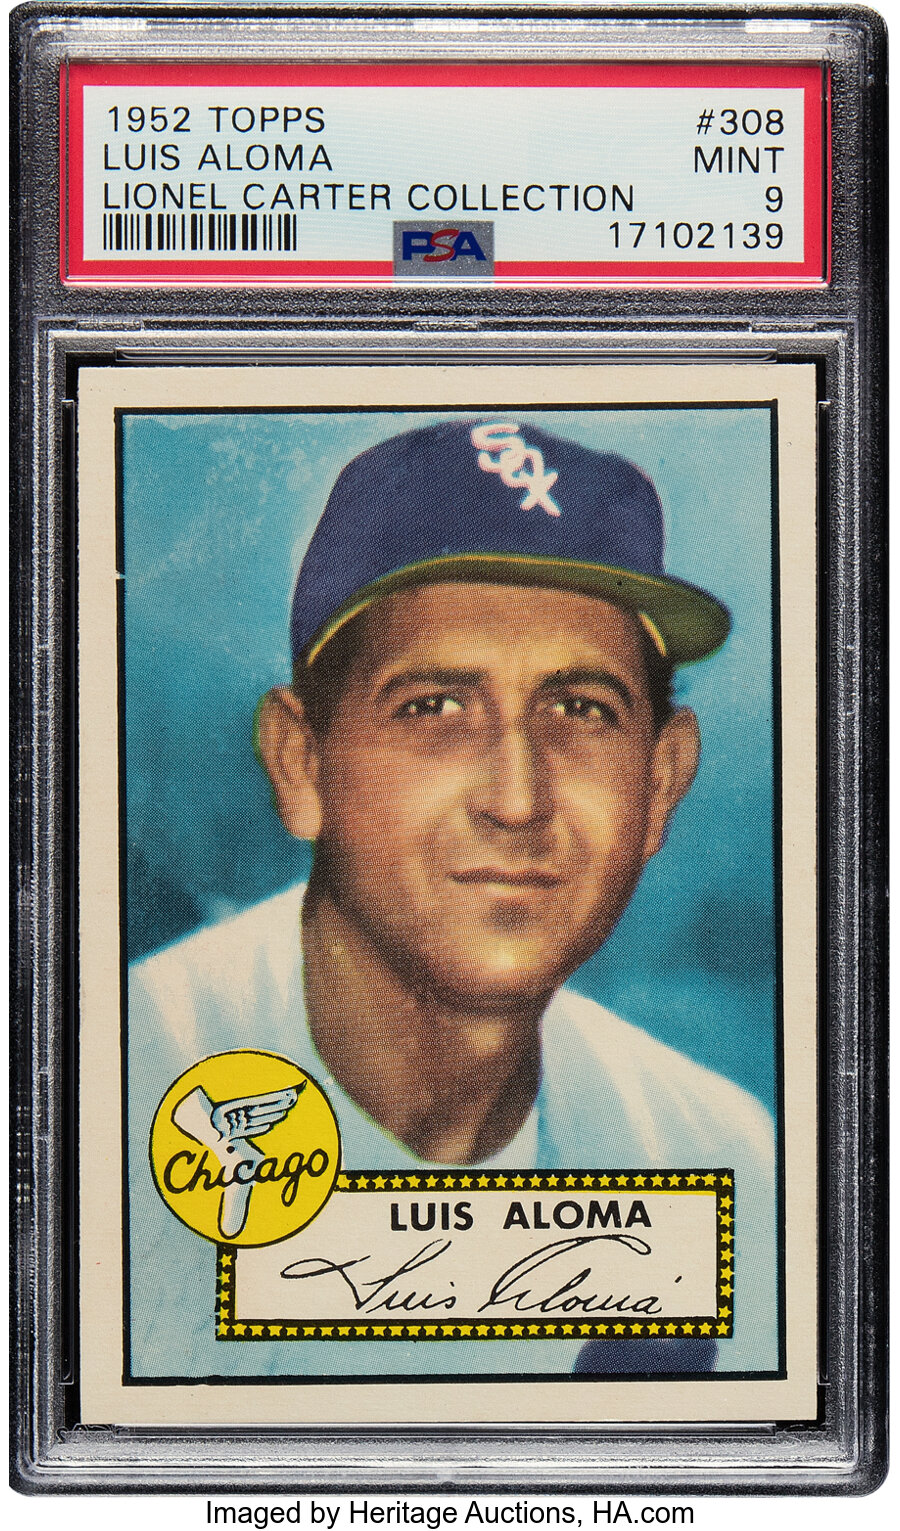 1952 Topps Luis Aloma #308 PSA Mint 9 - Pop Five, None Superior! From the Lionel Carter Collection